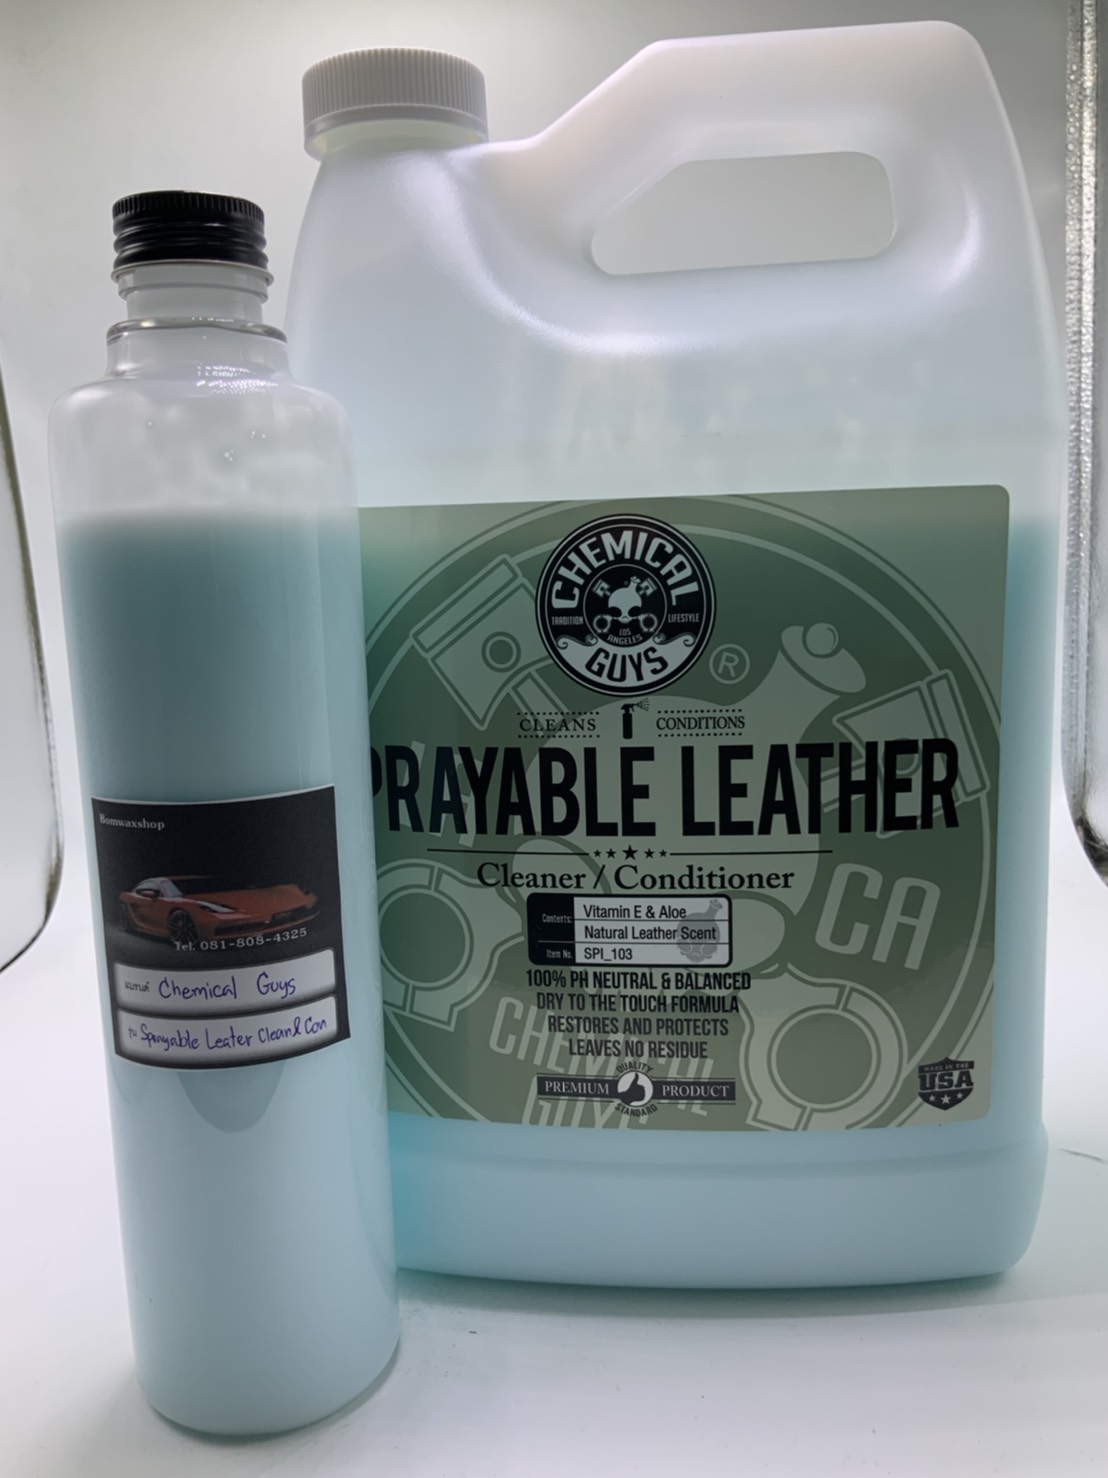 Chemical Guys - Sprayable Leather Cleaner & Conditioner แบบแบ่งจากแกลลอน 4 ออนซ์